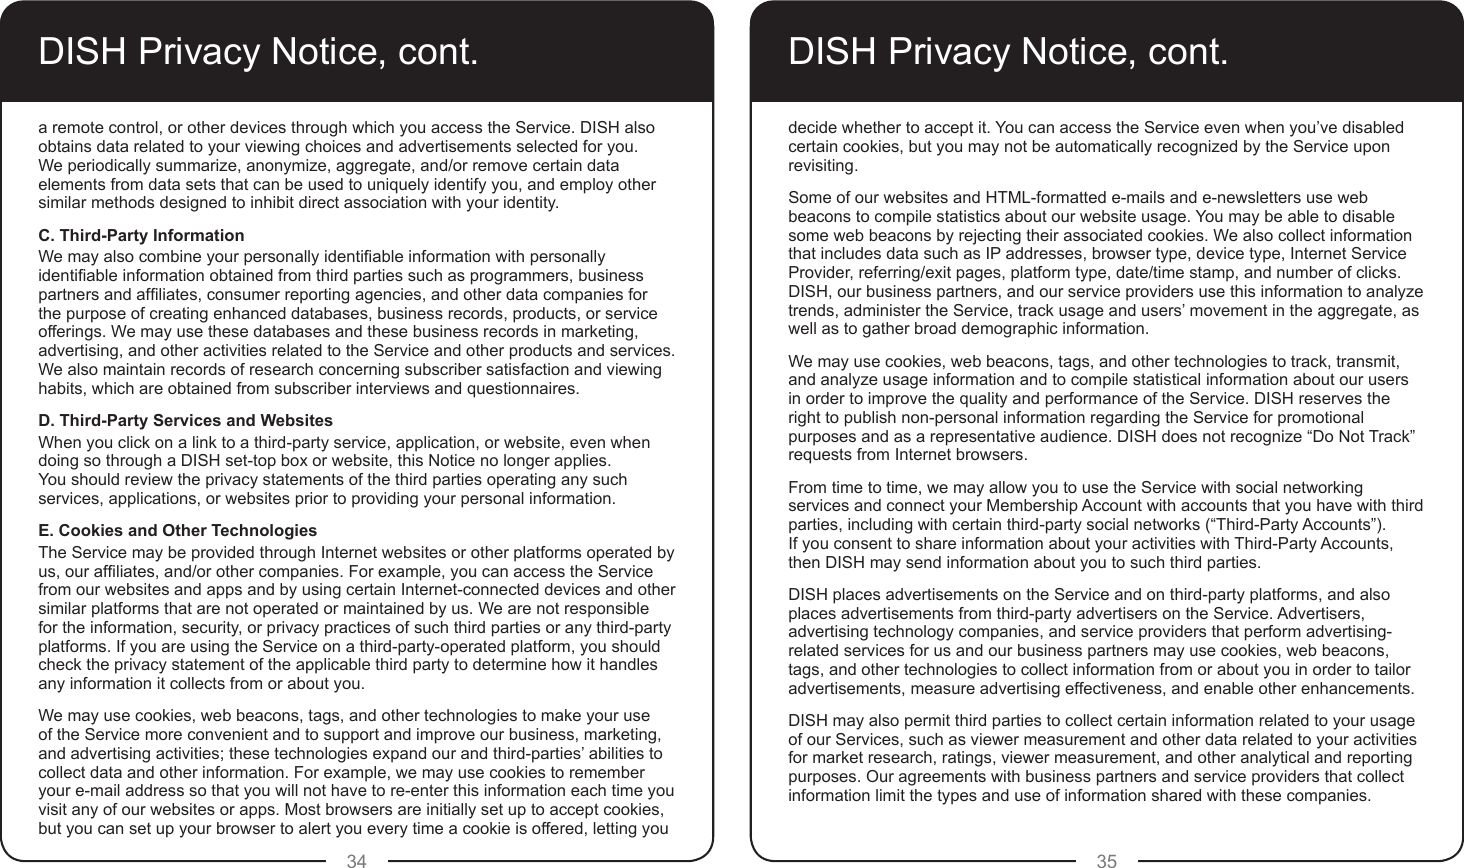 34 35DISH Privacy Notice, cont.a remote control, or other devices through which you access the Service. DISH also obtains data related to your viewing choices and advertisements selected for you.  We periodically summarize, anonymize, aggregate, and/or remove certain data elements from data sets that can be used to uniquely identify you, and employ other similar methods designed to inhibit direct association with your identity.C. Third-Party InformationWe may also combine your personally identiable information with personally identiable information obtained from third parties such as programmers, business partners and afliates, consumer reporting agencies, and other data companies for the purpose of creating enhanced databases, business records, products, or service offerings. We may use these databases and these business records in marketing, advertising, and other activities related to the Service and other products and services. We also maintain records of research concerning subscriber satisfaction and viewing habits, which are obtained from subscriber interviews and questionnaires.D. Third-Party Services and WebsitesWhen you click on a link to a third-party service, application, or website, even when doing so through a DISH set-top box or website, this Notice no longer applies.  You should review the privacy statements of the third parties operating any such services, applications, or websites prior to providing your personal information.E. Cookies and Other TechnologiesThe Service may be provided through Internet websites or other platforms operated by us, our afliates, and/or other companies. For example, you can access the Service from our websites and apps and by using certain Internet-connected devices and other similar platforms that are not operated or maintained by us. We are not responsible for the information, security, or privacy practices of such third parties or any third-party platforms. If you are using the Service on a third-party-operated platform, you should check the privacy statement of the applicable third party to determine how it handles any information it collects from or about you.We may use cookies, web beacons, tags, and other technologies to make your use of the Service more convenient and to support and improve our business, marketing, and advertising activities; these technologies expand our and third-parties’ abilities to collect data and other information. For example, we may use cookies to remember your e-mail address so that you will not have to re-enter this information each time you visit any of our websites or apps. Most browsers are initially set up to accept cookies, but you can set up your browser to alert you every time a cookie is offered, letting you DISH Privacy Notice, cont.decide whether to accept it. You can access the Service even when you’ve disabled certain cookies, but you may not be automatically recognized by the Service upon revisiting.Some of our websites and HTML-formatted e-mails and e-newsletters use web beacons to compile statistics about our website usage. You may be able to disable some web beacons by rejecting their associated cookies. We also collect information that includes data such as IP addresses, browser type, device type, Internet Service Provider, referring/exit pages, platform type, date/time stamp, and number of clicks. DISH, our business partners, and our service providers use this information to analyze trends, administer the Service, track usage and users’ movement in the aggregate, as well as to gather broad demographic information.We may use cookies, web beacons, tags, and other technologies to track, transmit, and analyze usage information and to compile statistical information about our users in order to improve the quality and performance of the Service. DISH reserves the right to publish non-personal information regarding the Service for promotional purposes and as a representative audience. DISH does not recognize “Do Not Track” requests from Internet browsers.From time to time, we may allow you to use the Service with social networking services and connect your Membership Account with accounts that you have with third parties, including with certain third-party social networks (“Third-Party Accounts”).  If you consent to share information about your activities with Third-Party Accounts, then DISH may send information about you to such third parties.DISH places advertisements on the Service and on third-party platforms, and also places advertisements from third-party advertisers on the Service. Advertisers, advertising technology companies, and service providers that perform advertising-related services for us and our business partners may use cookies, web beacons, tags, and other technologies to collect information from or about you in order to tailor advertisements, measure advertising effectiveness, and enable other enhancements.DISH may also permit third parties to collect certain information related to your usage of our Services, such as viewer measurement and other data related to your activities for market research, ratings, viewer measurement, and other analytical and reporting purposes. Our agreements with business partners and service providers that collect information limit the types and use of information shared with these companies.